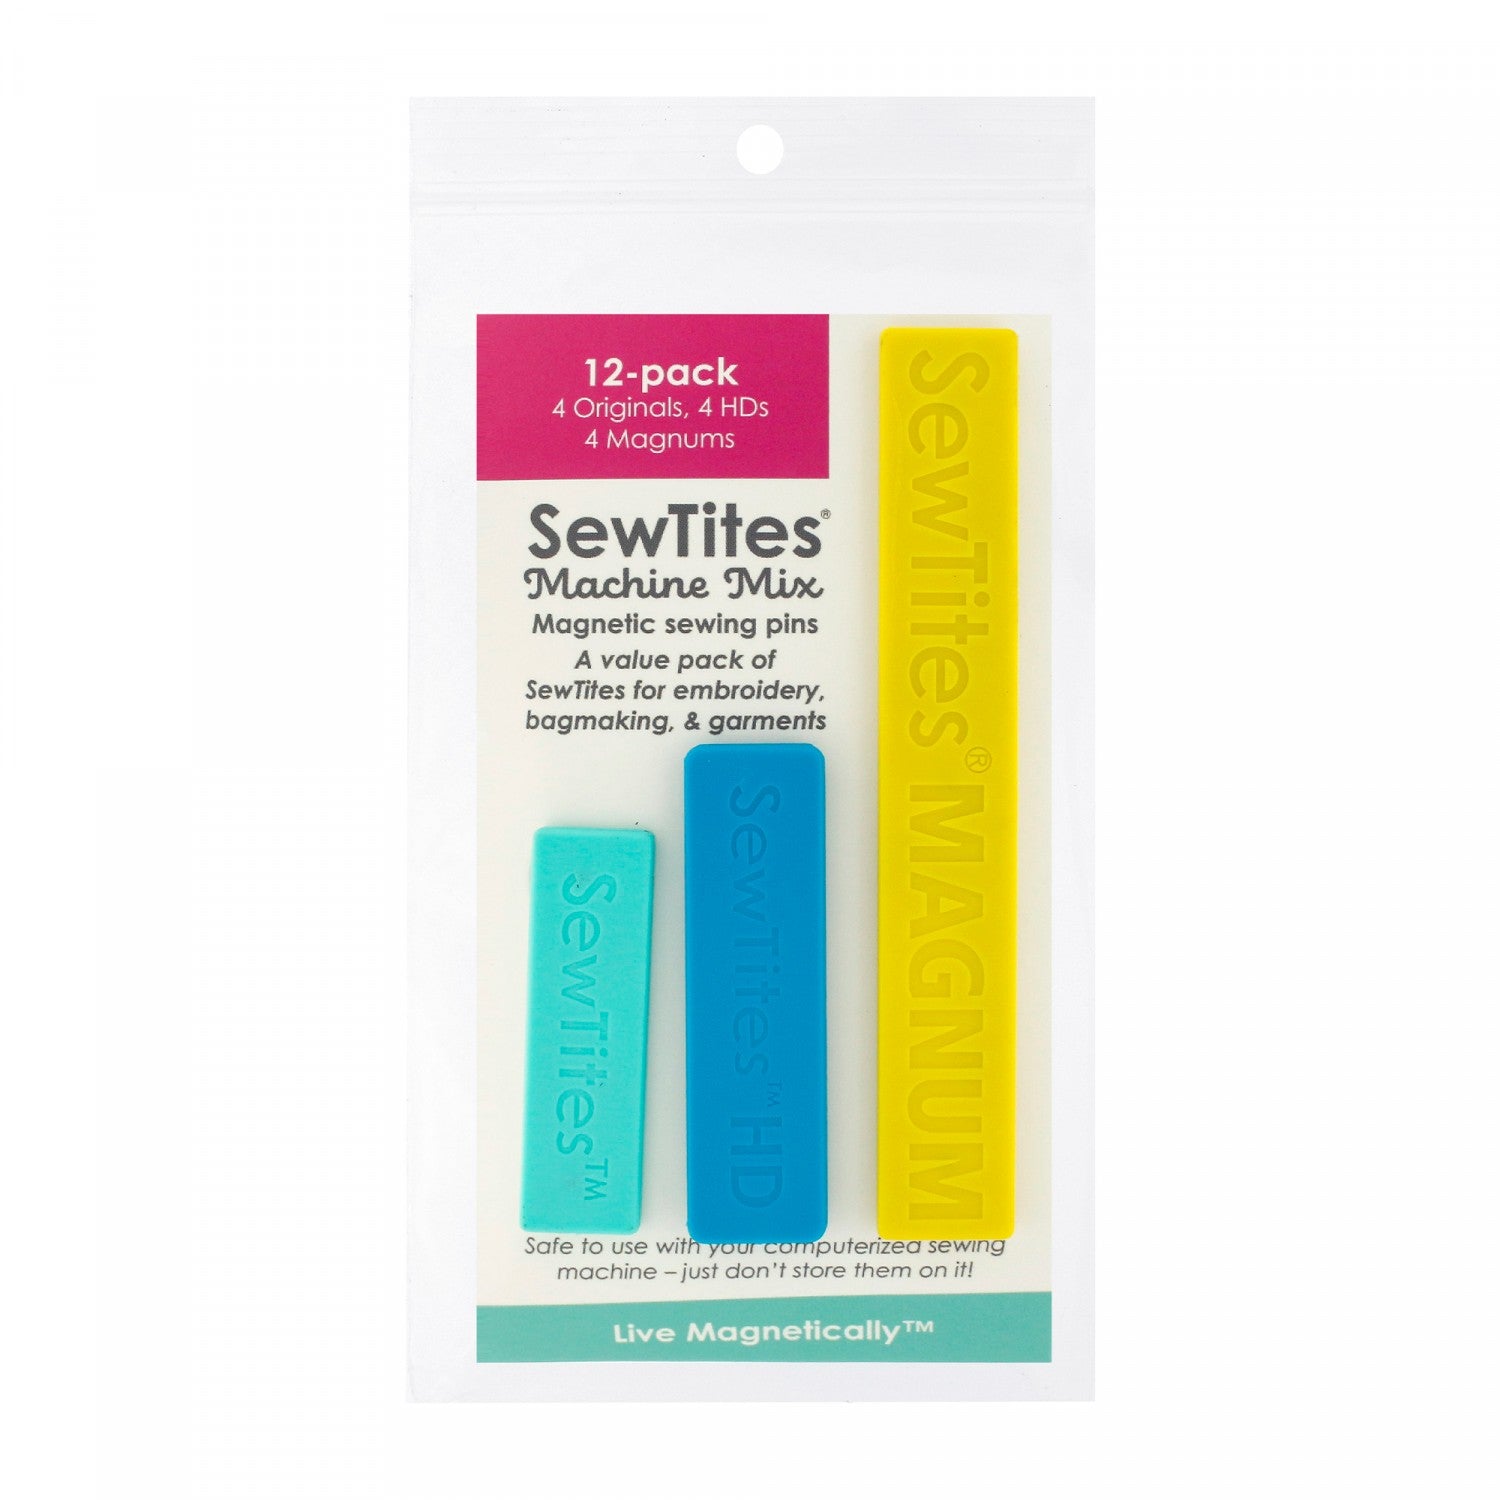 The SewTites Machine Mix packs contain a combination of models for machine embroidery, bagmaking, garment making, and more – our Originals, HDs, and Magnums.  SewTites Specs:  Original - 1.78 x .5 in (45 x 13 mm) with three strong earth magnets on back HD - 2.125 x .5625"" (54 x 14.5 mm) with three very strong earth magnets on back Magnum - 3.98” x .59” (101 x 15 mm) each with five stronger earth magnets on back  Made of: Plastic and Metal Use: Magnetic Sewing pins Included: 12 magnets per package